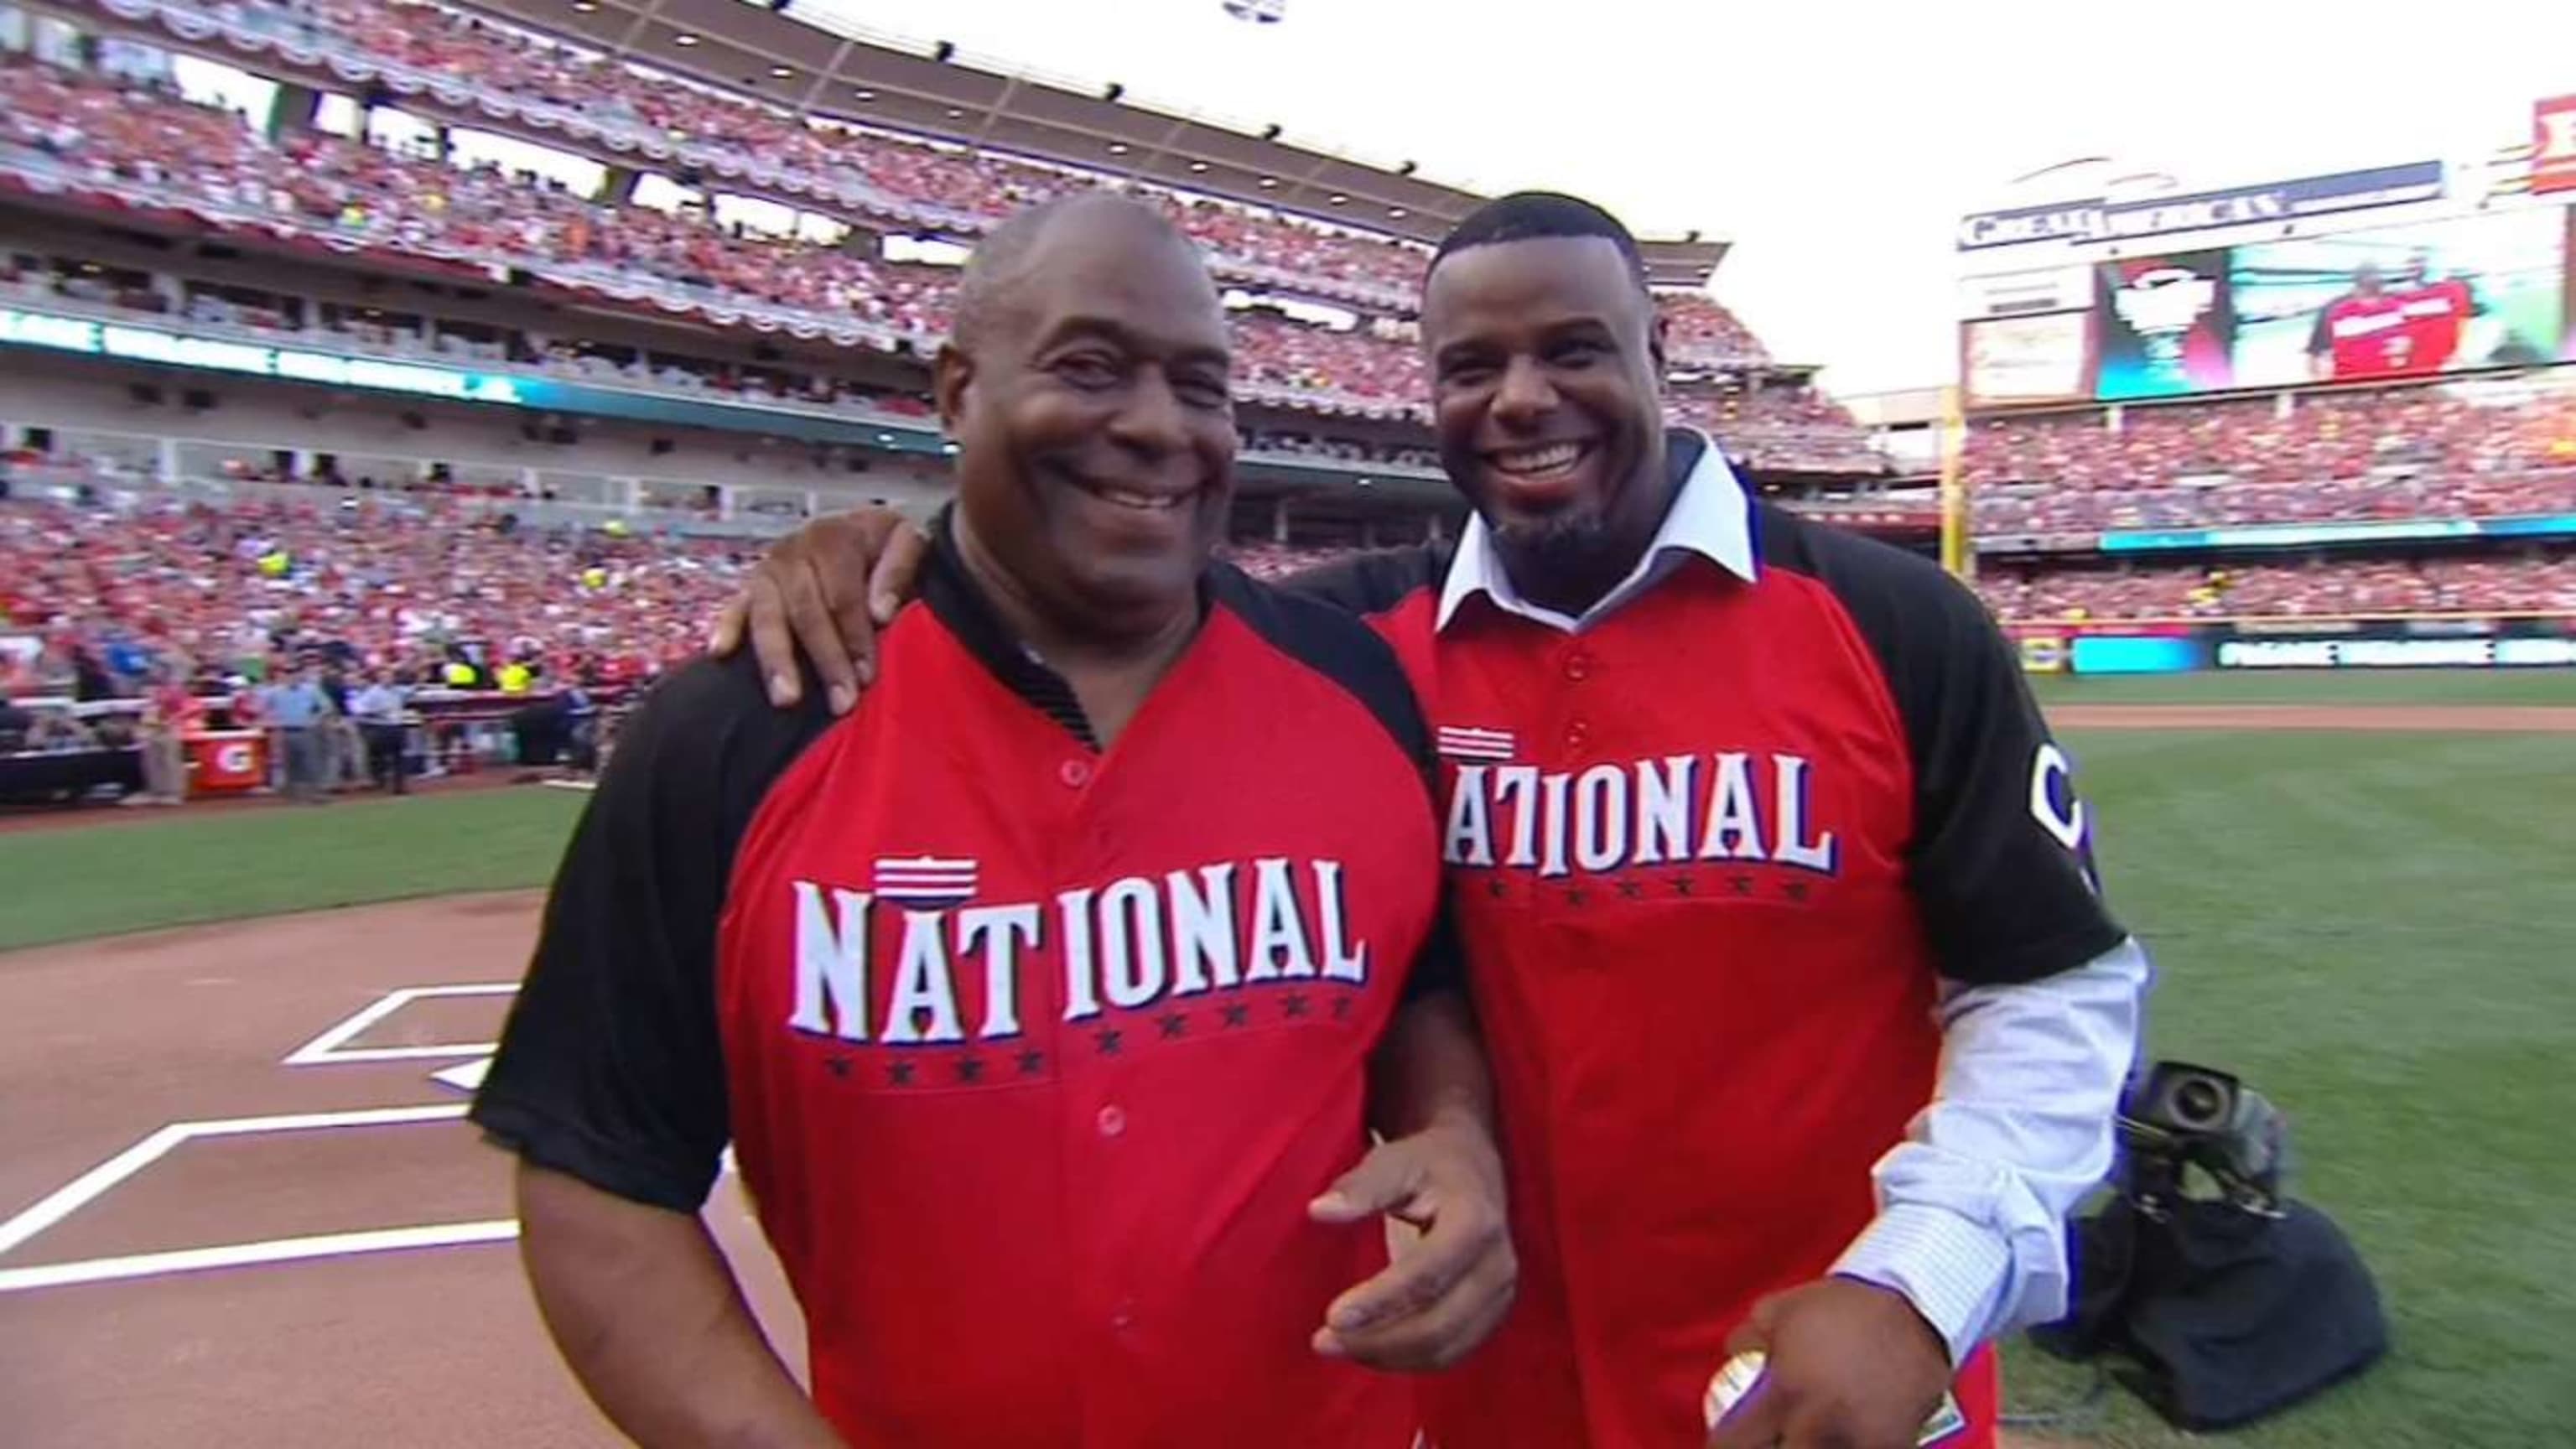 How's your mom? A reporter's personal bond with Ken Griffey Jr.